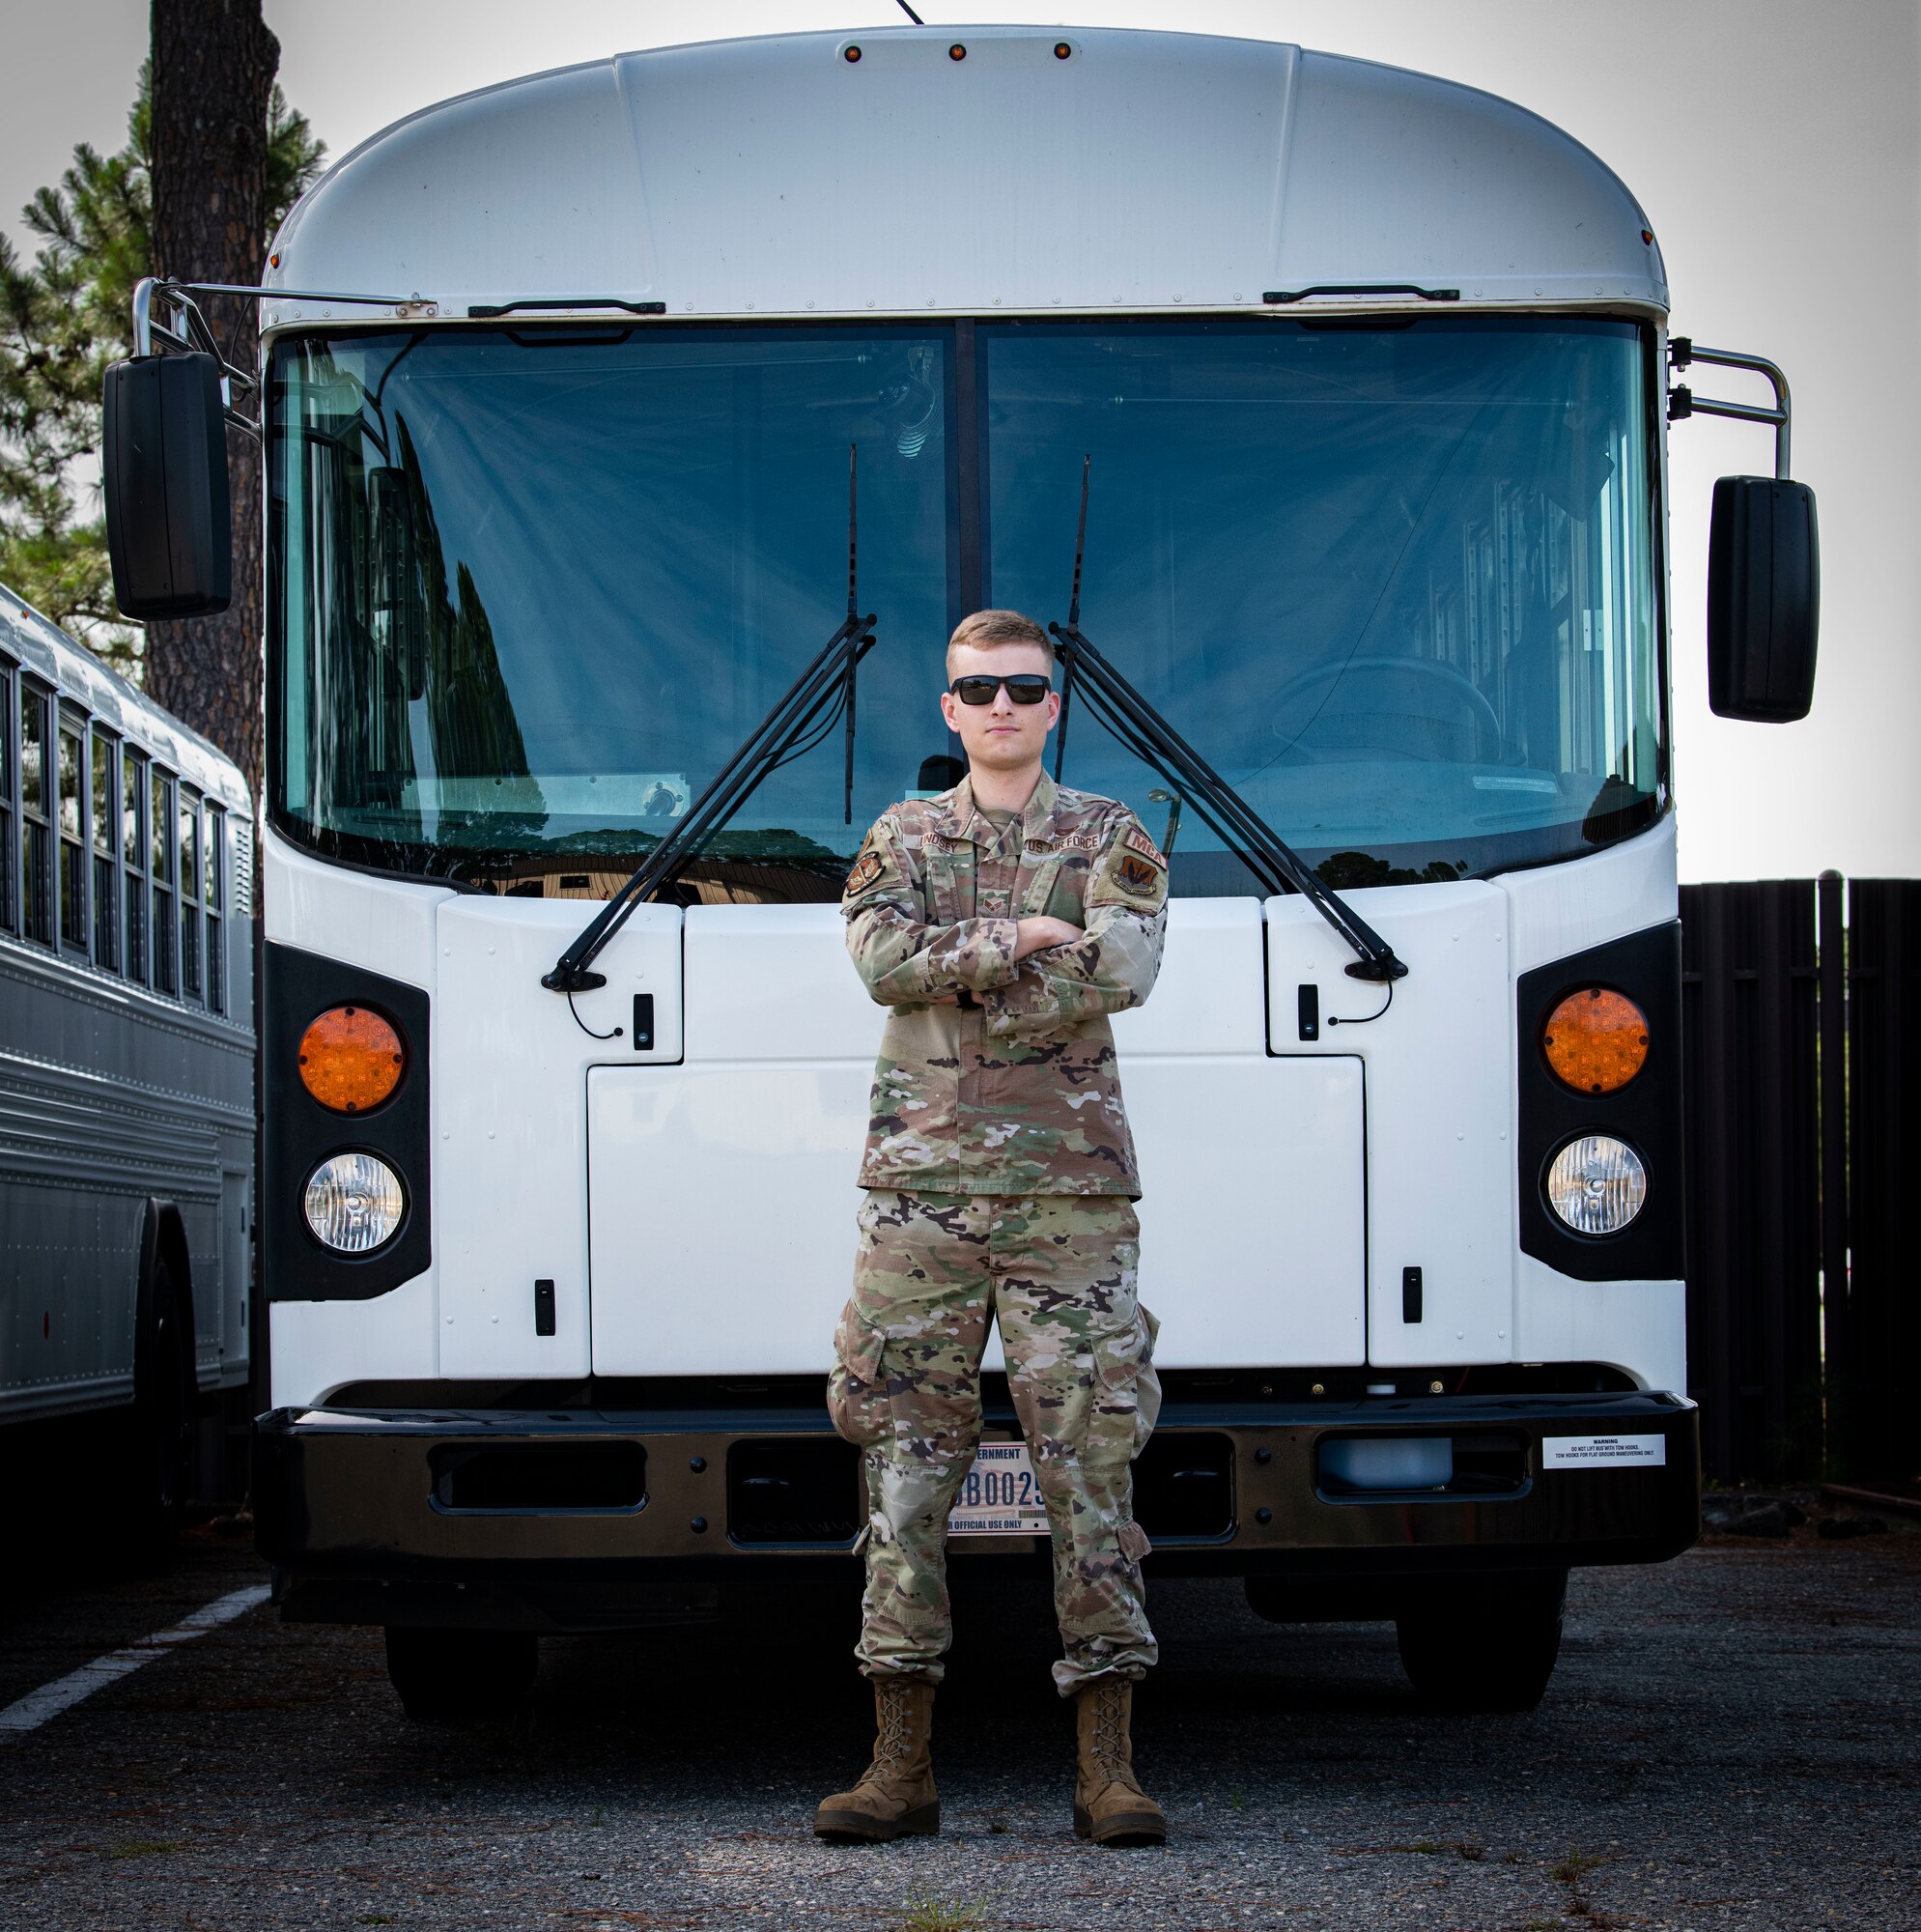 Senior Airman Remington Lindsey, 4th Logistics Readiness Squadron ground

transportation trainer, poses for a photo at Seymour Johnson Air Force Base,

North Carolina, July 14, 2022. Lindsey was recognized as this week's Wingman

Wednesday for his leadership, communication skills and work ethic. (U.S. Air

Force photo by Airman 1st Class Sabrina Fuller.)